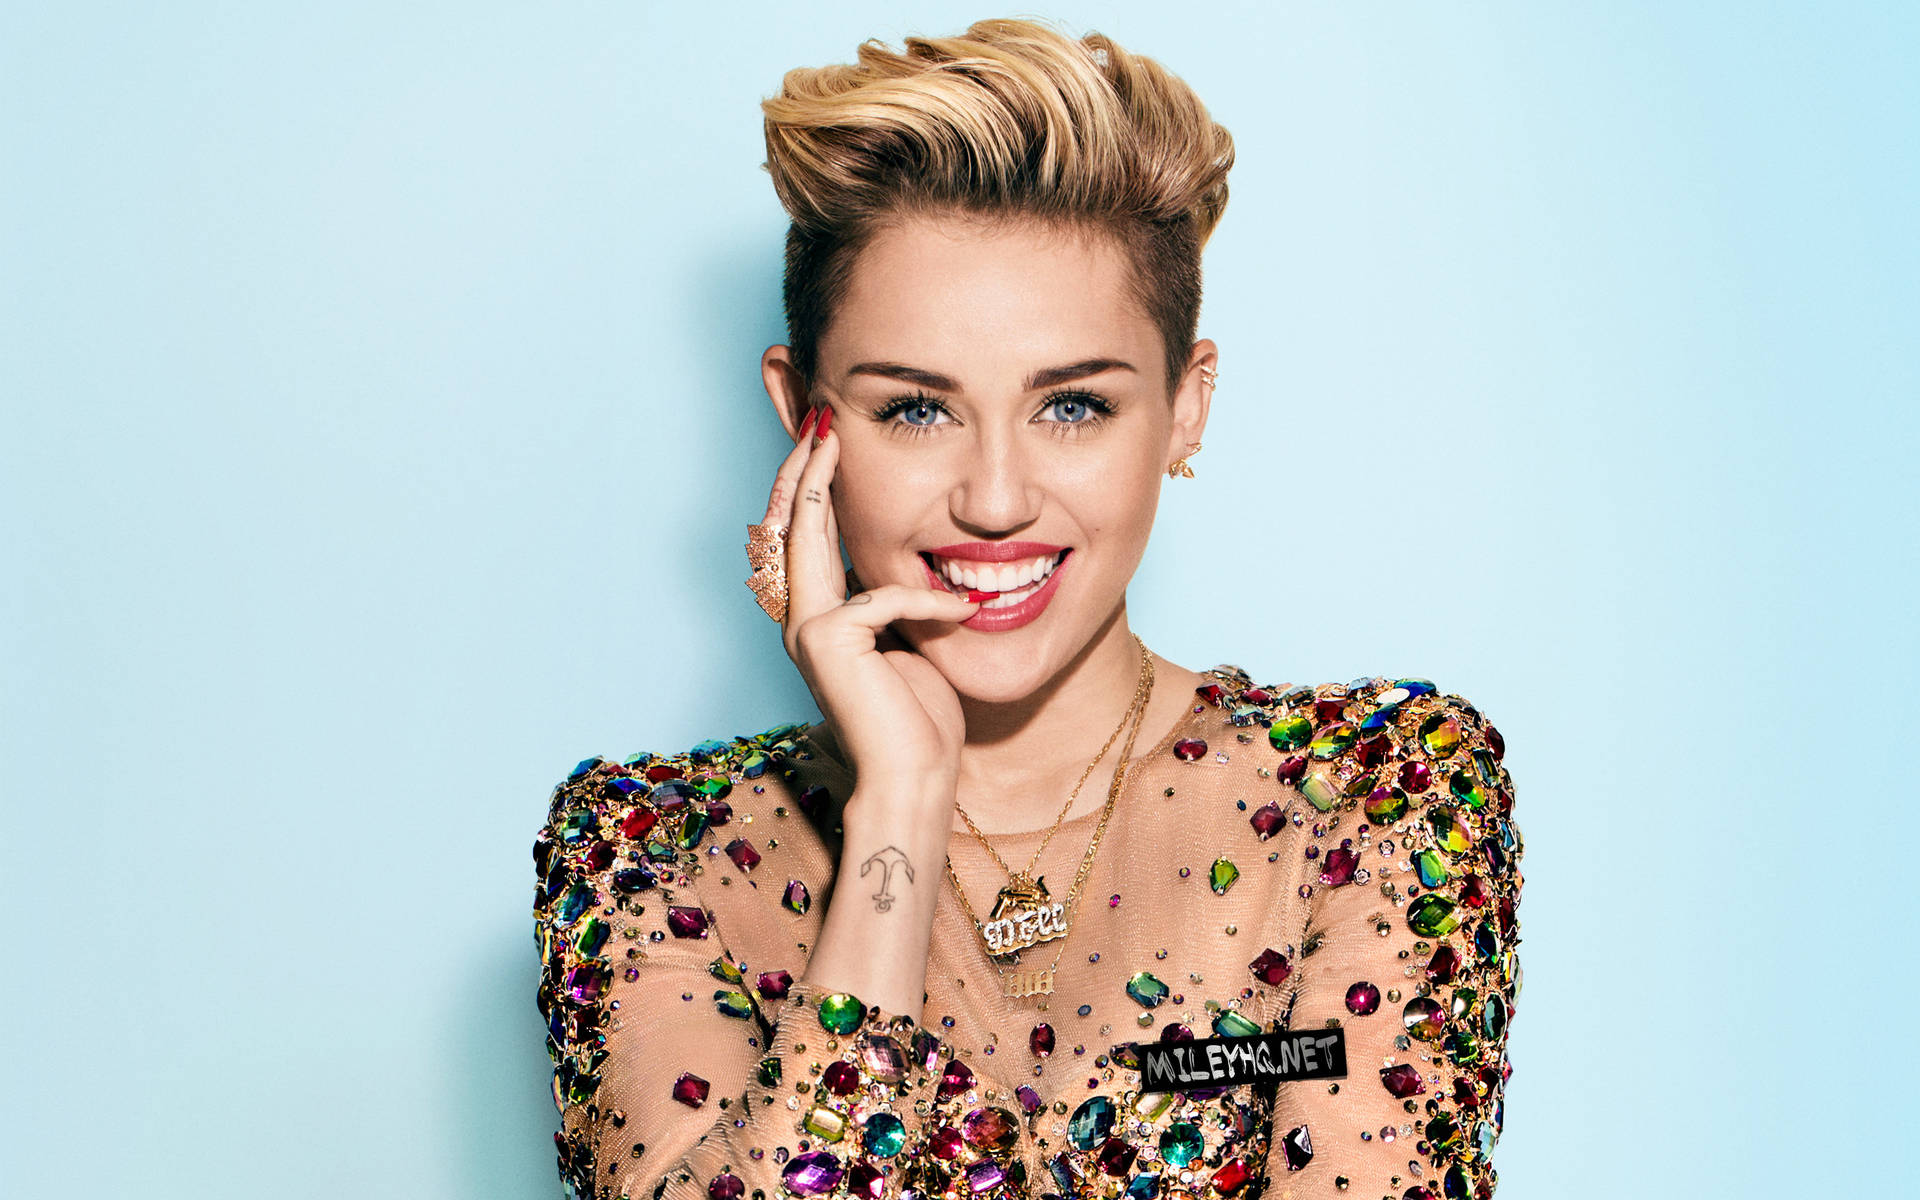 Miley Cyrus In Gem Stone Outfit Background